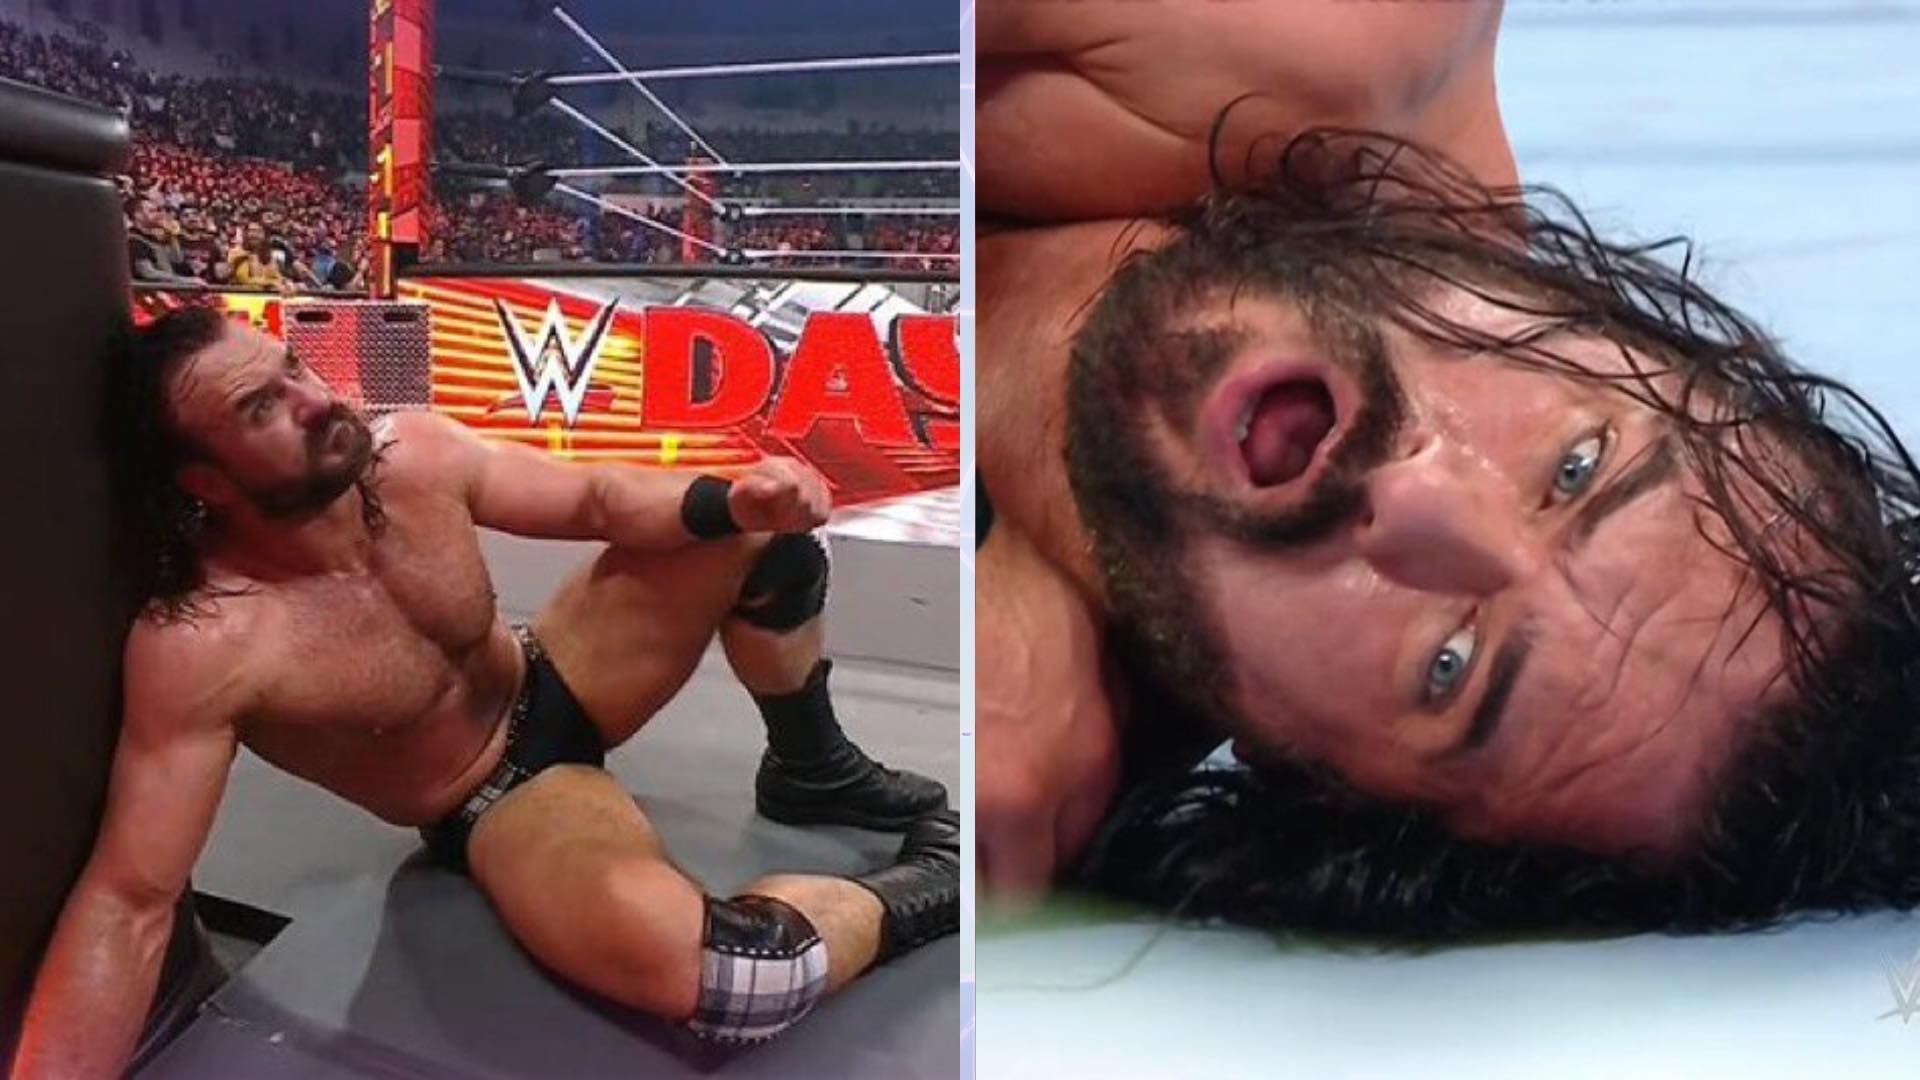 Drew McIntyre lost his title match on WWE RAW: Day 1.